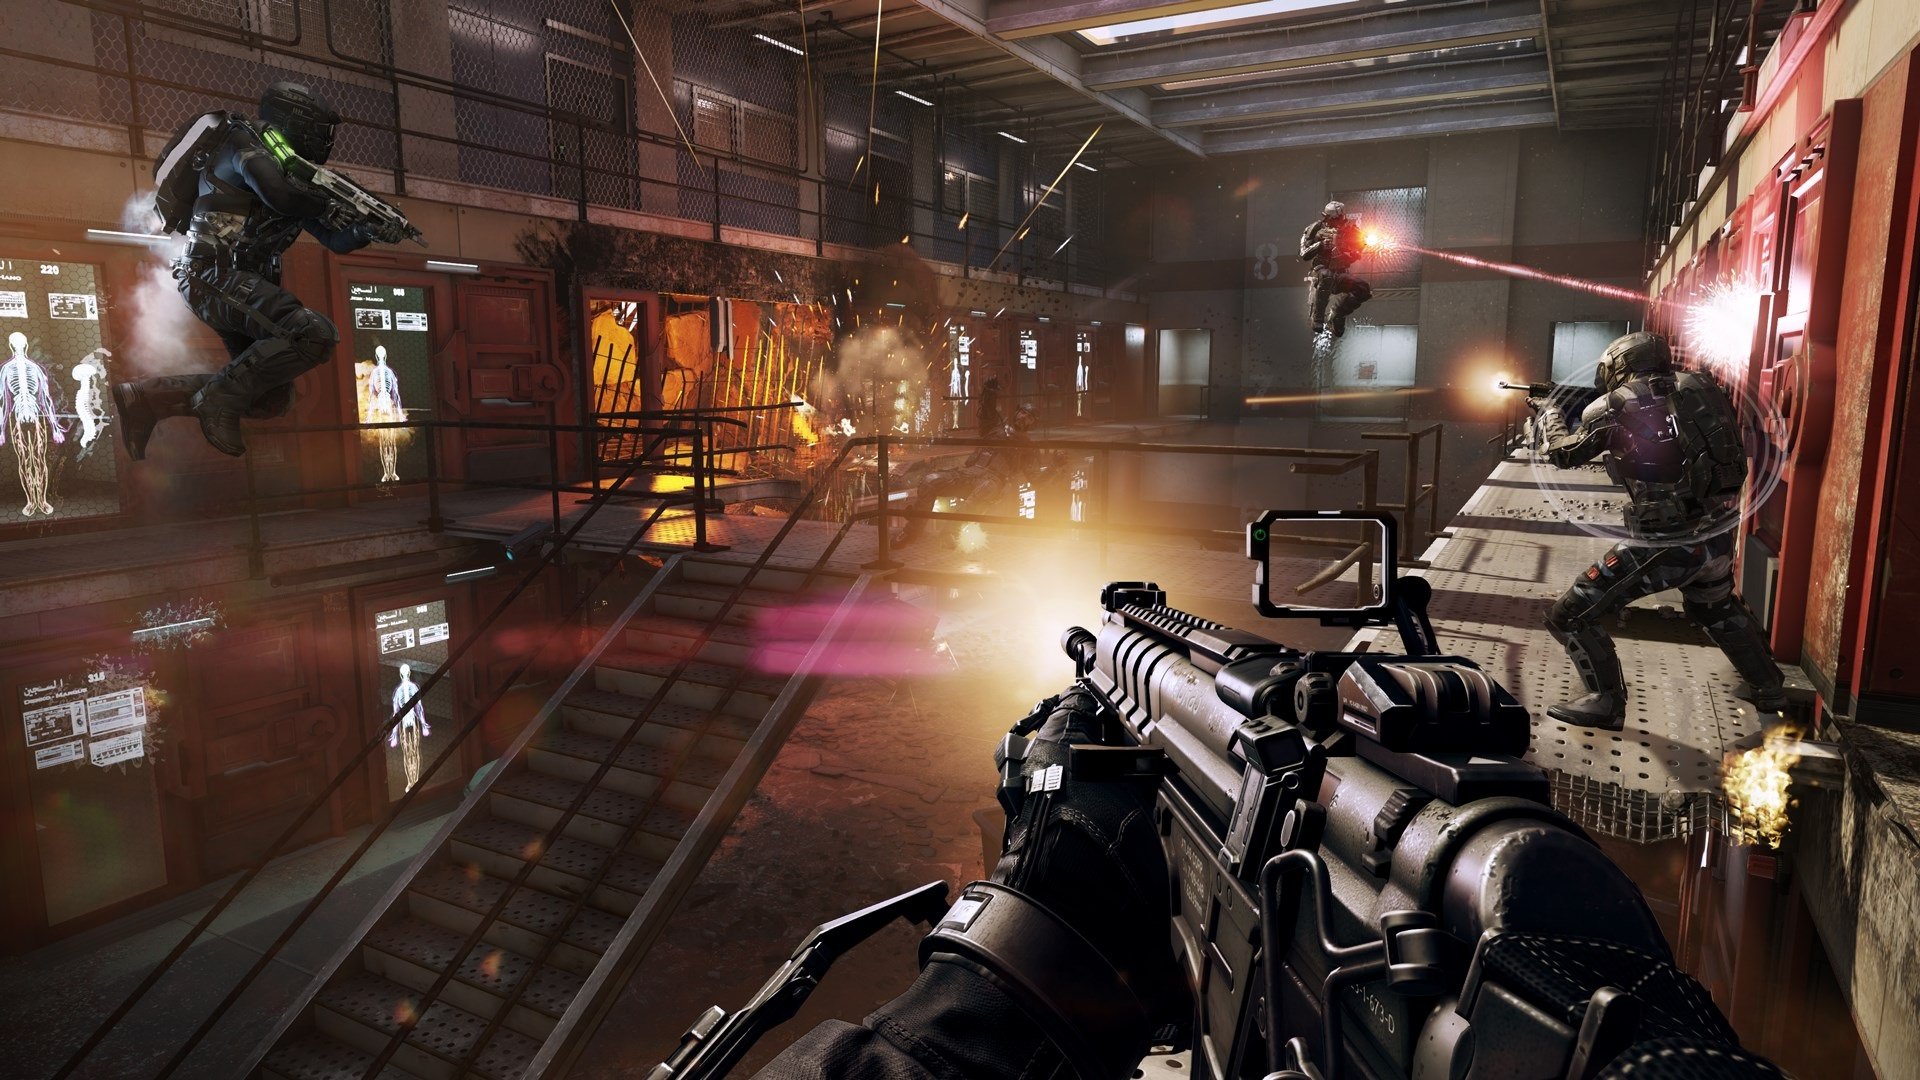 Advanced Warfare is COD's biggest technological leap since Call of Duty 2